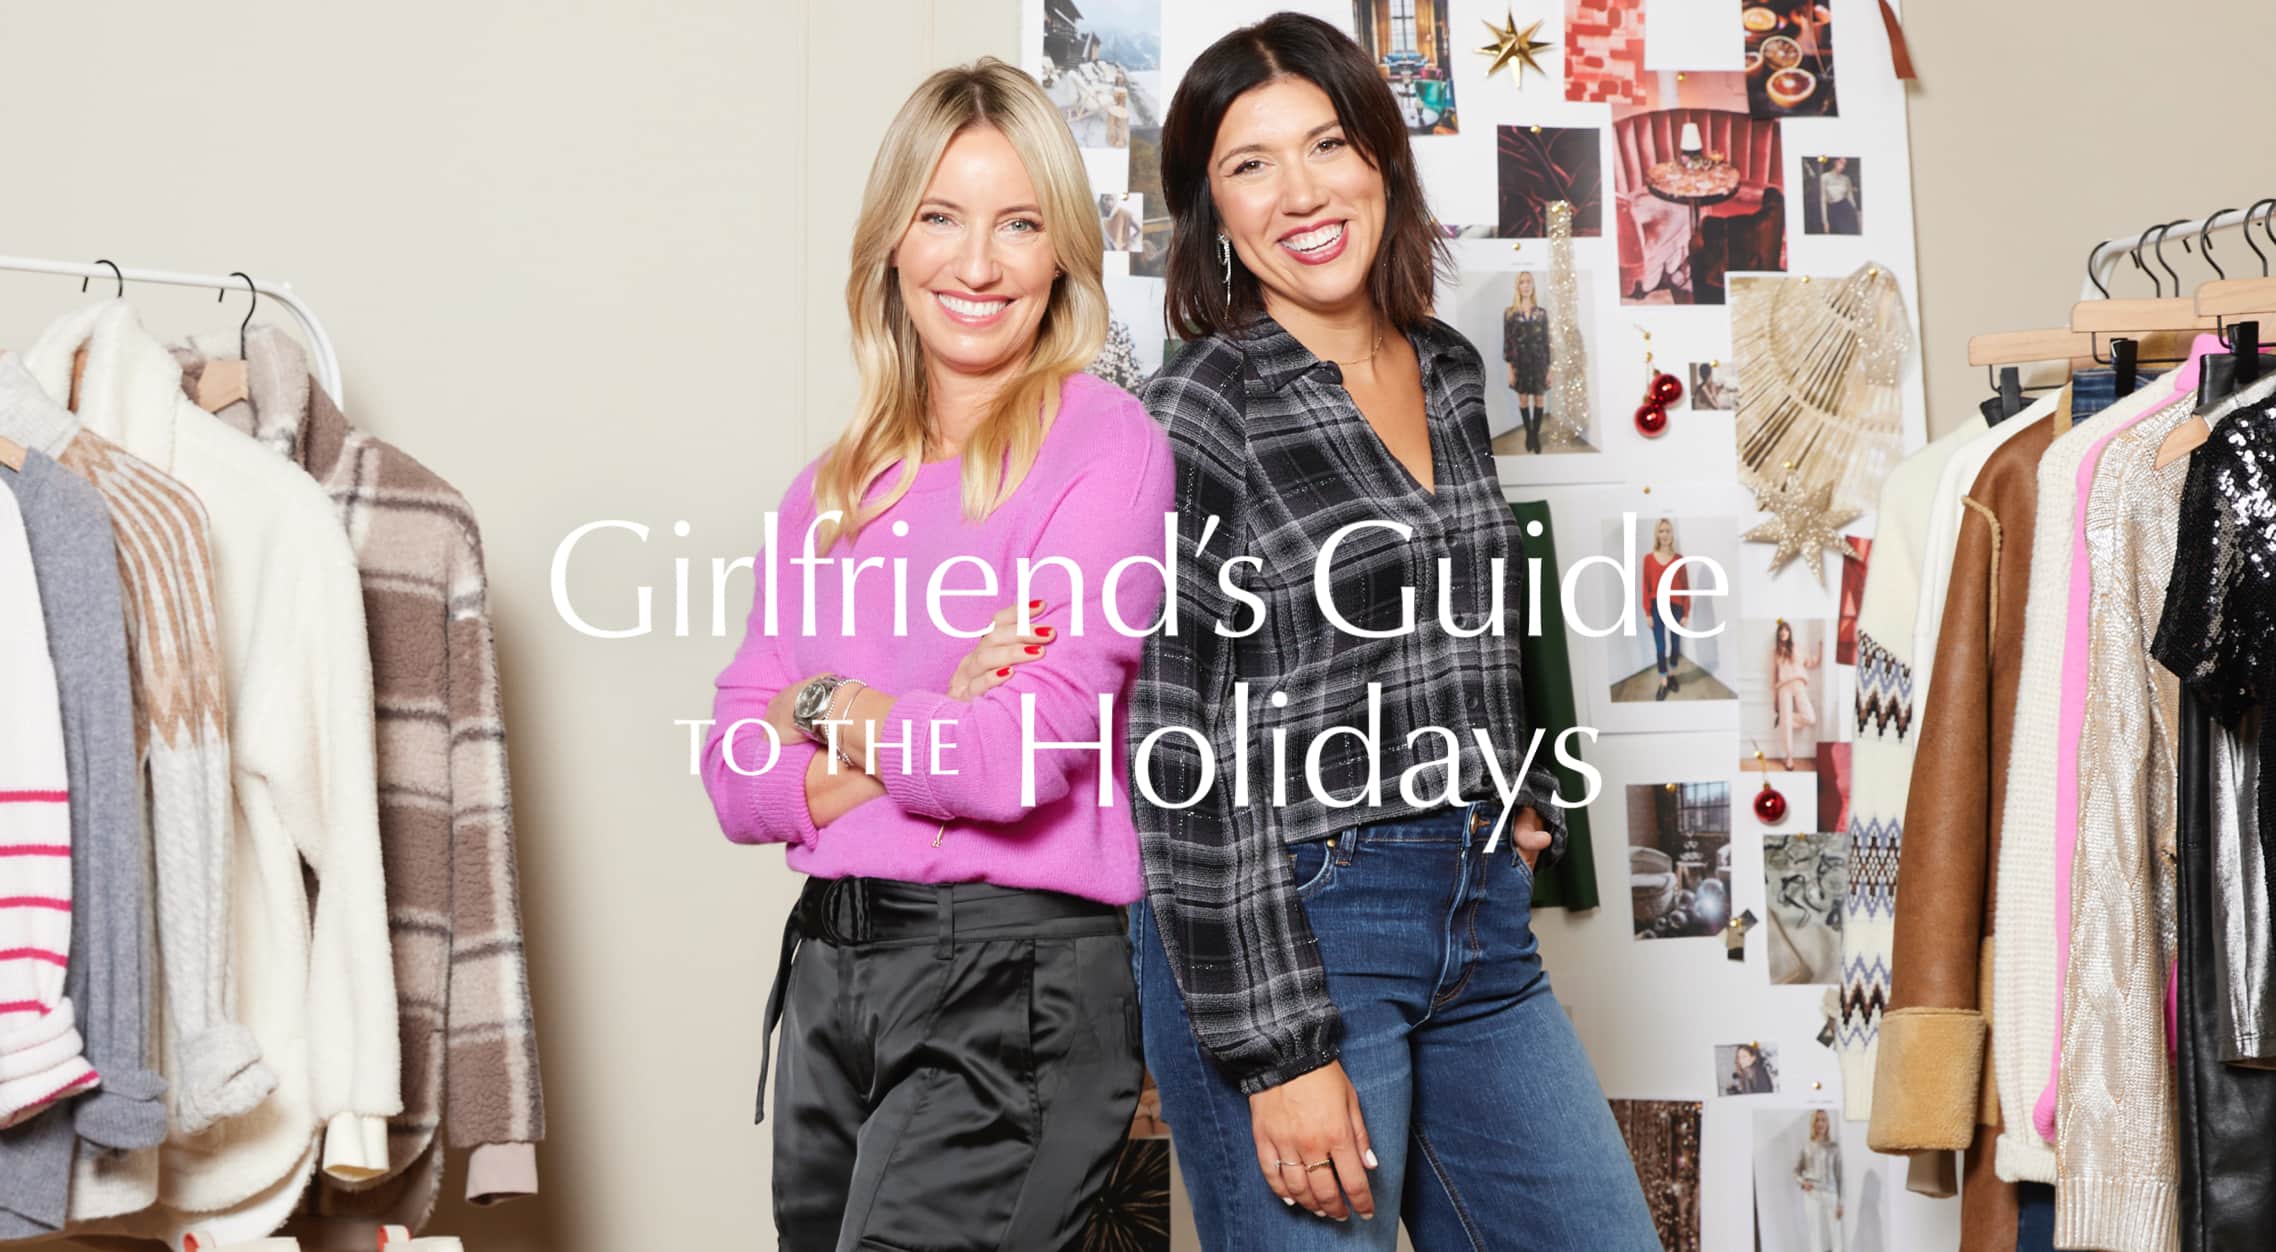 Girlfriend's Guide to the Holidays